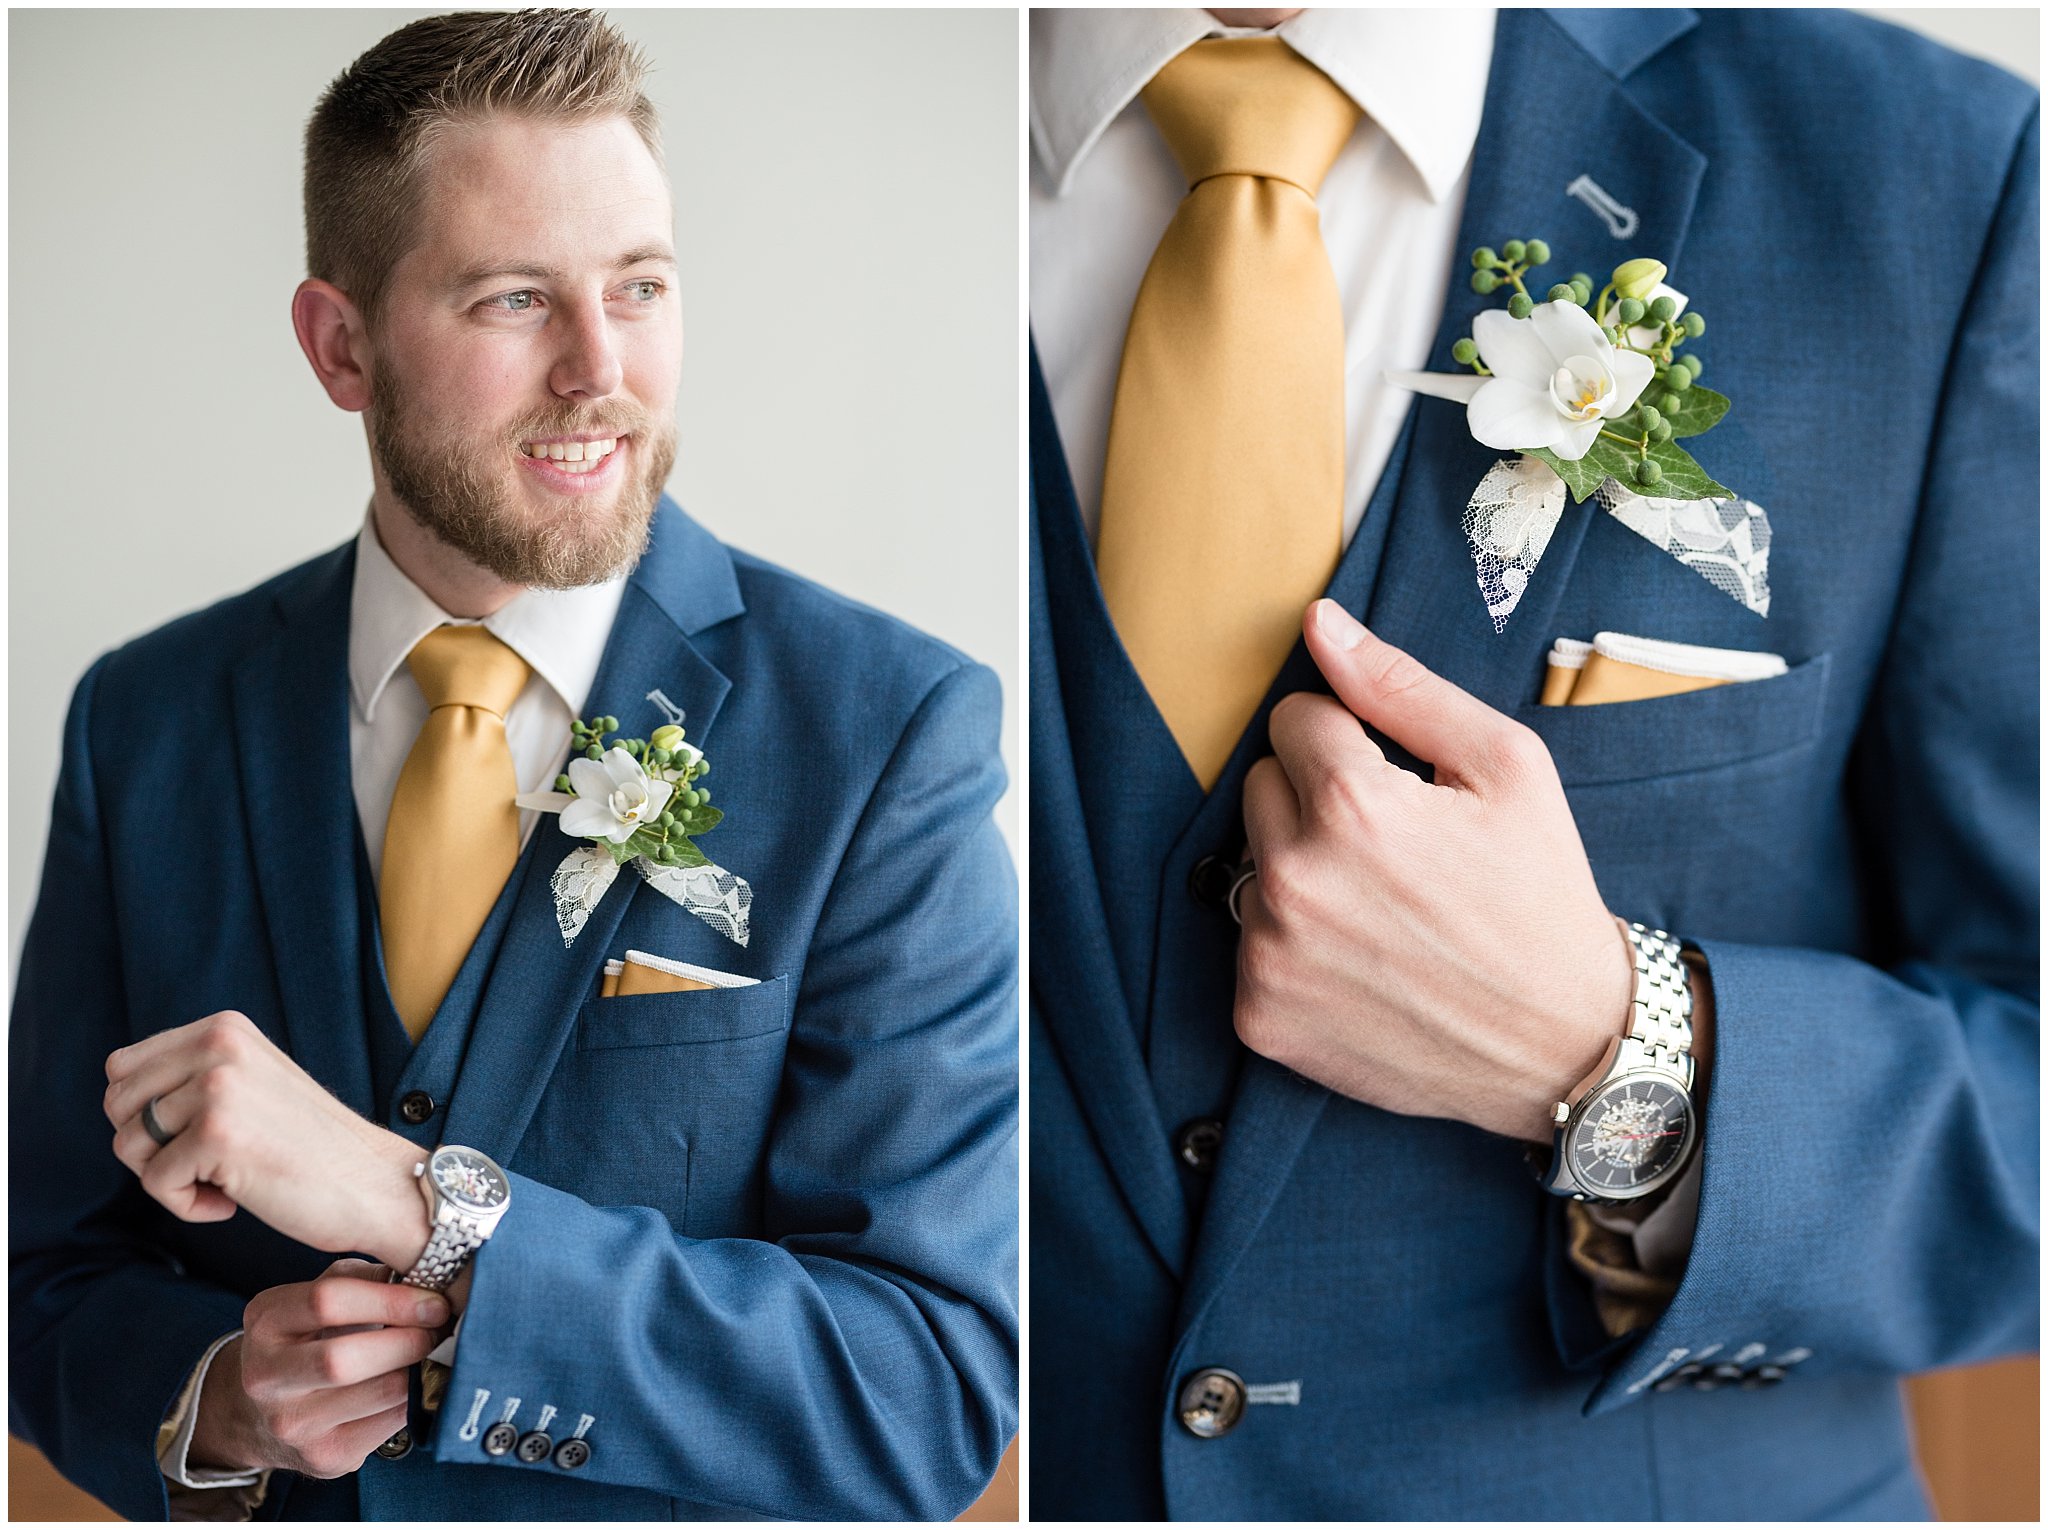 Groom getting ready in blue suit with gold tie | Utah Wedding Photographer | Jessie and Dallin Photography